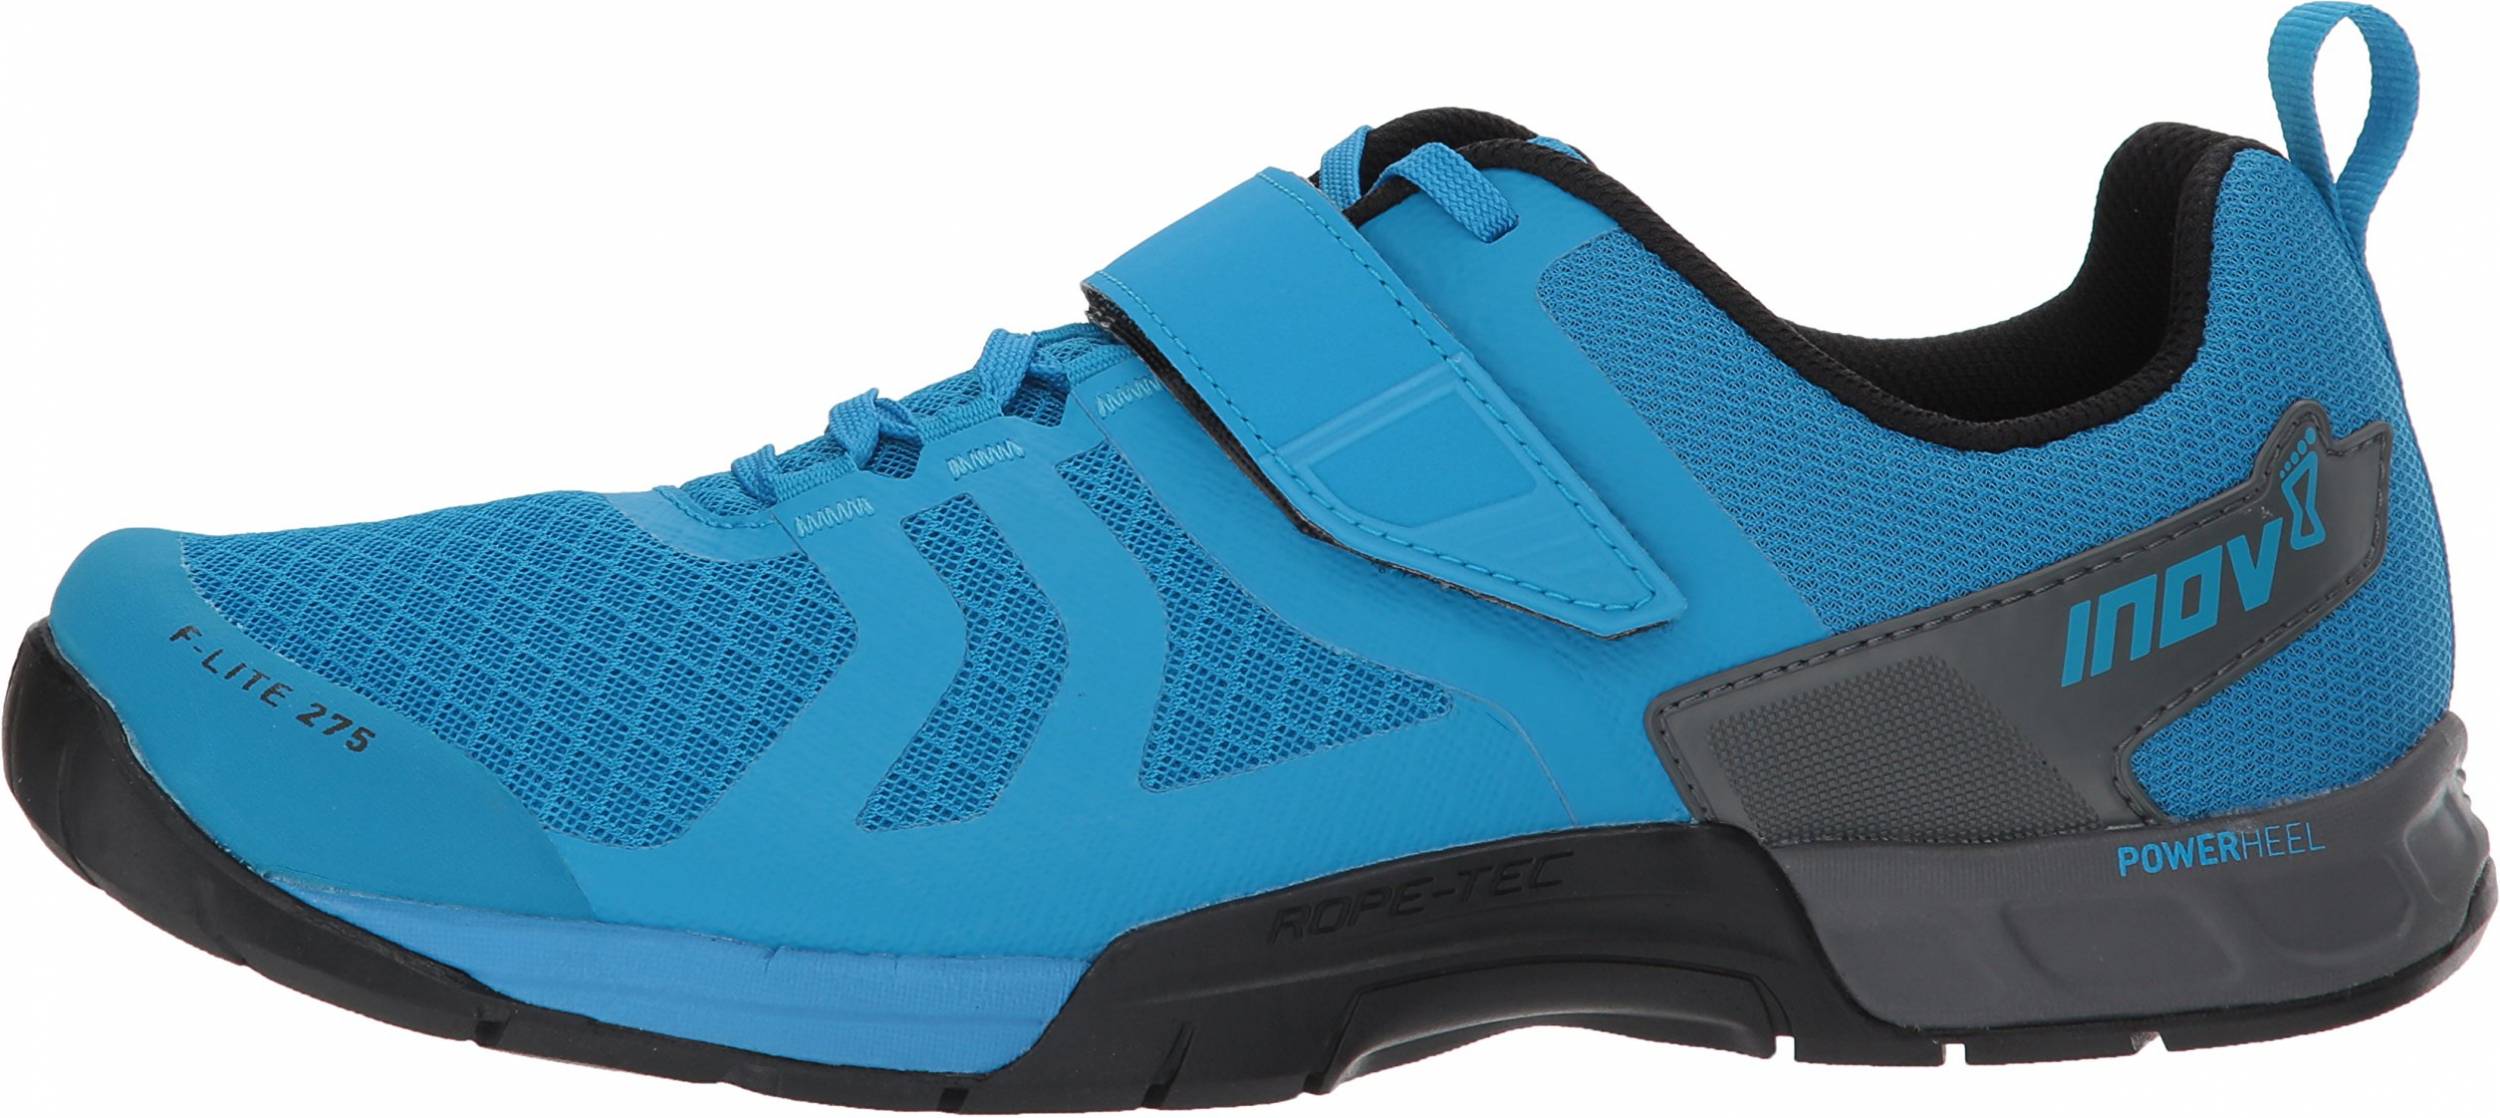 Only $66 + Review of Inov-8 F-Lite 275 